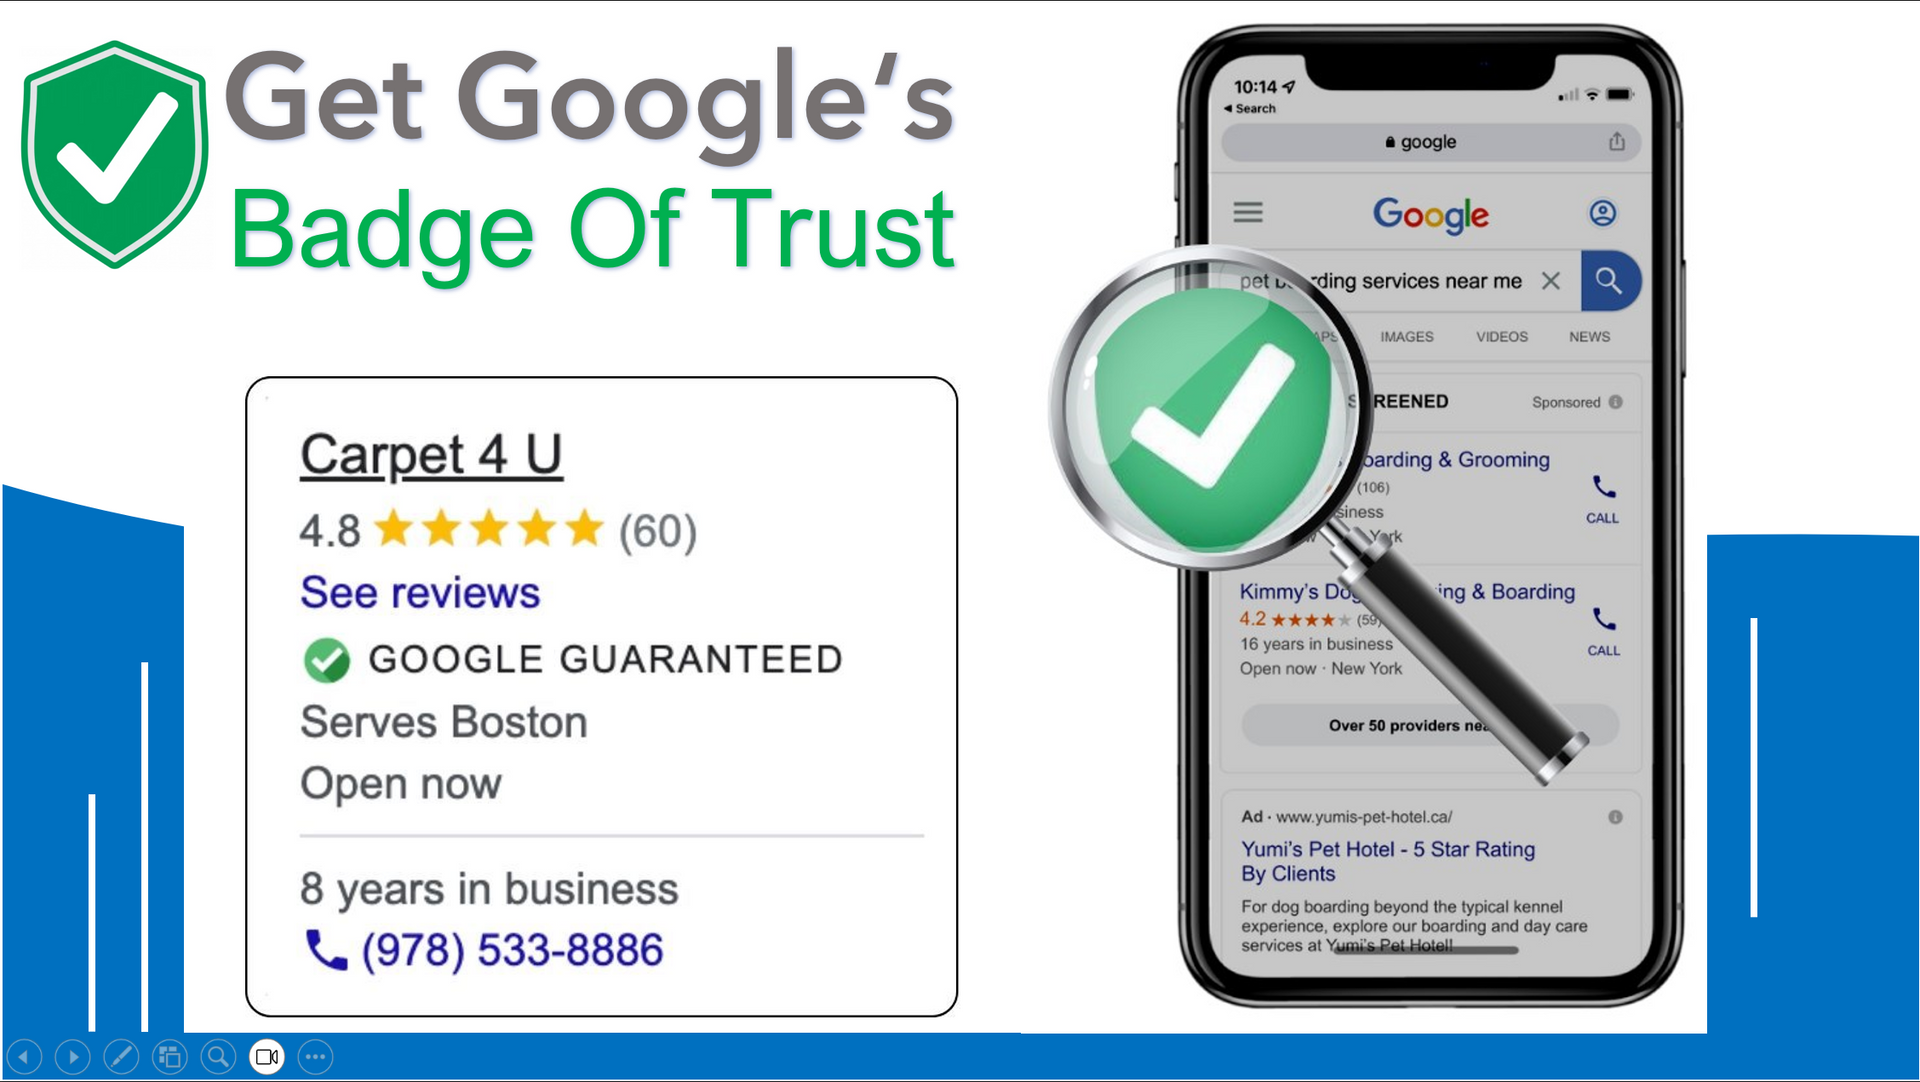 A phone with a magnifying glass on it and the words `` get google 's badge of trust ''.